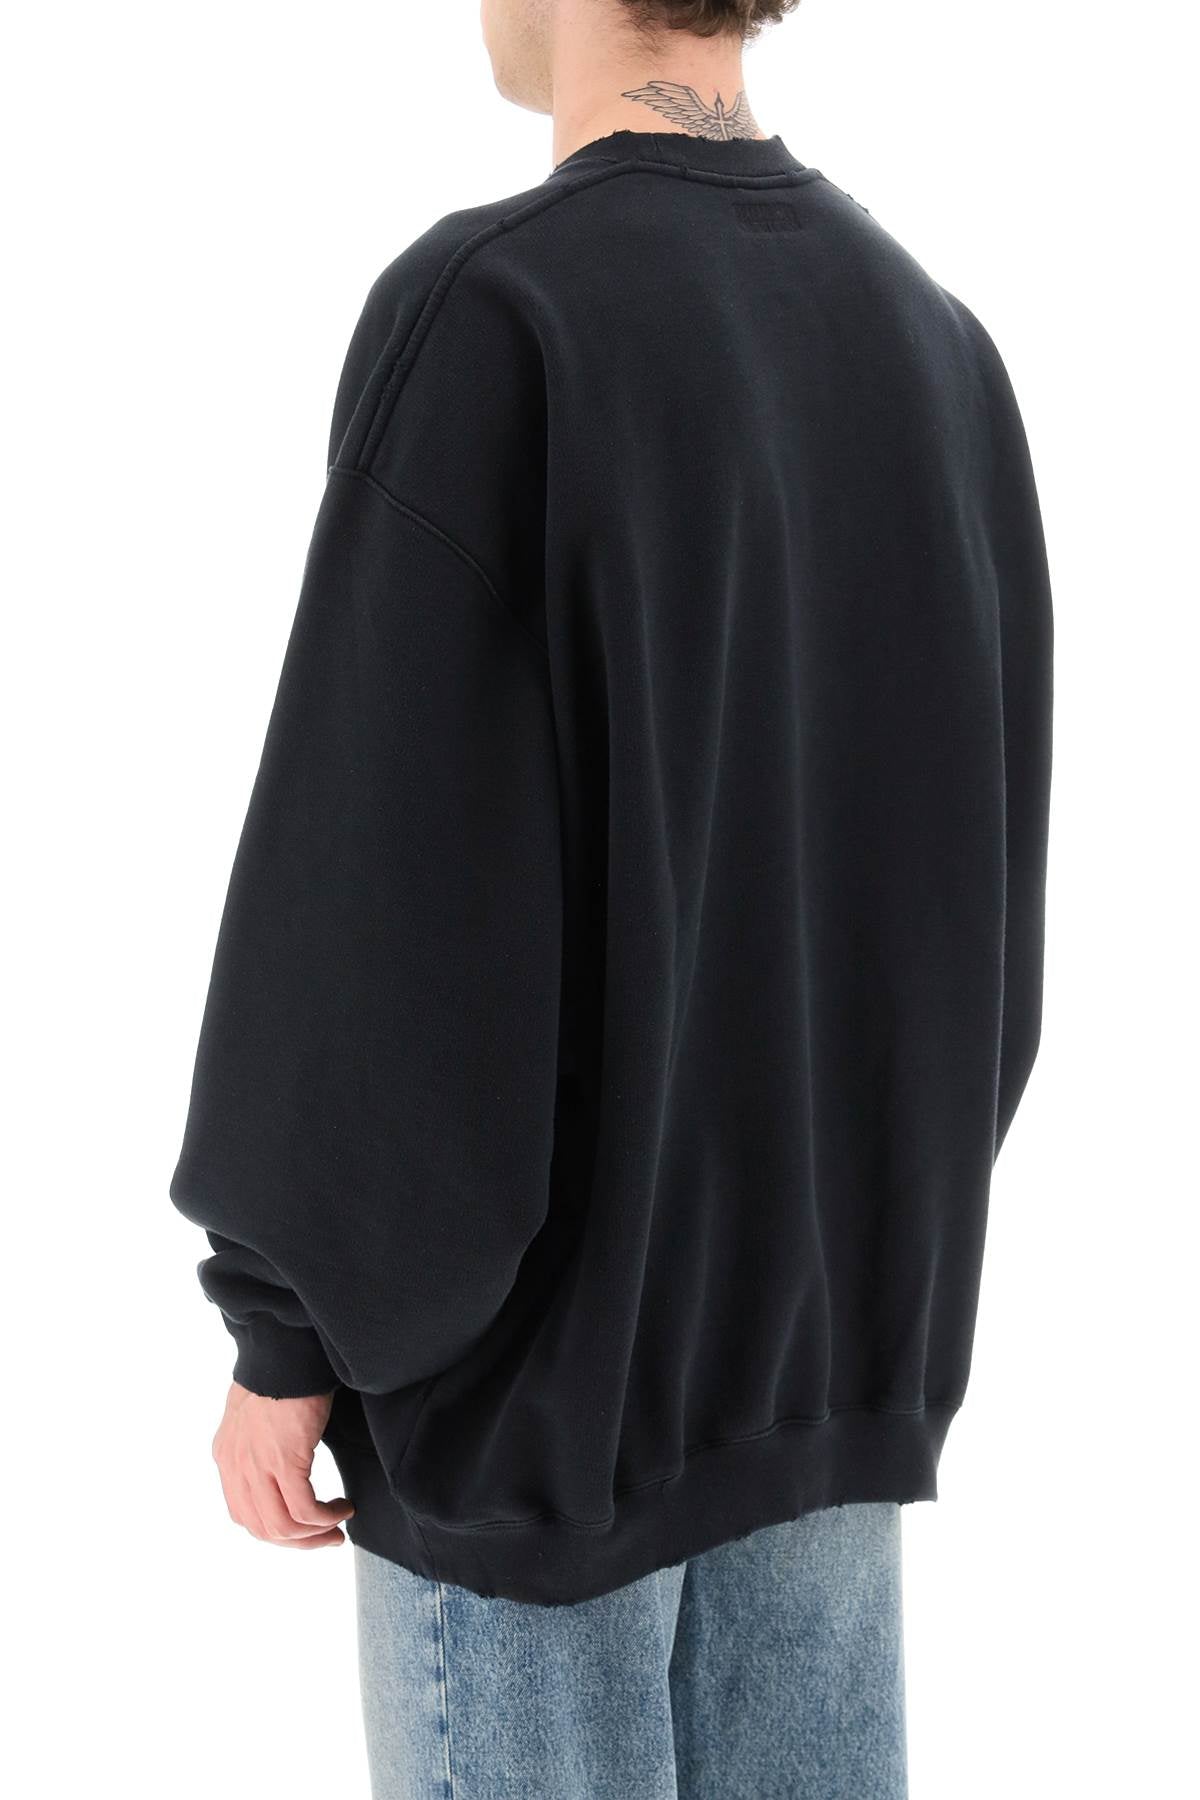 VETEMENTS Men's Black Sweatshirt with Embroidered Logo and Palm Motif